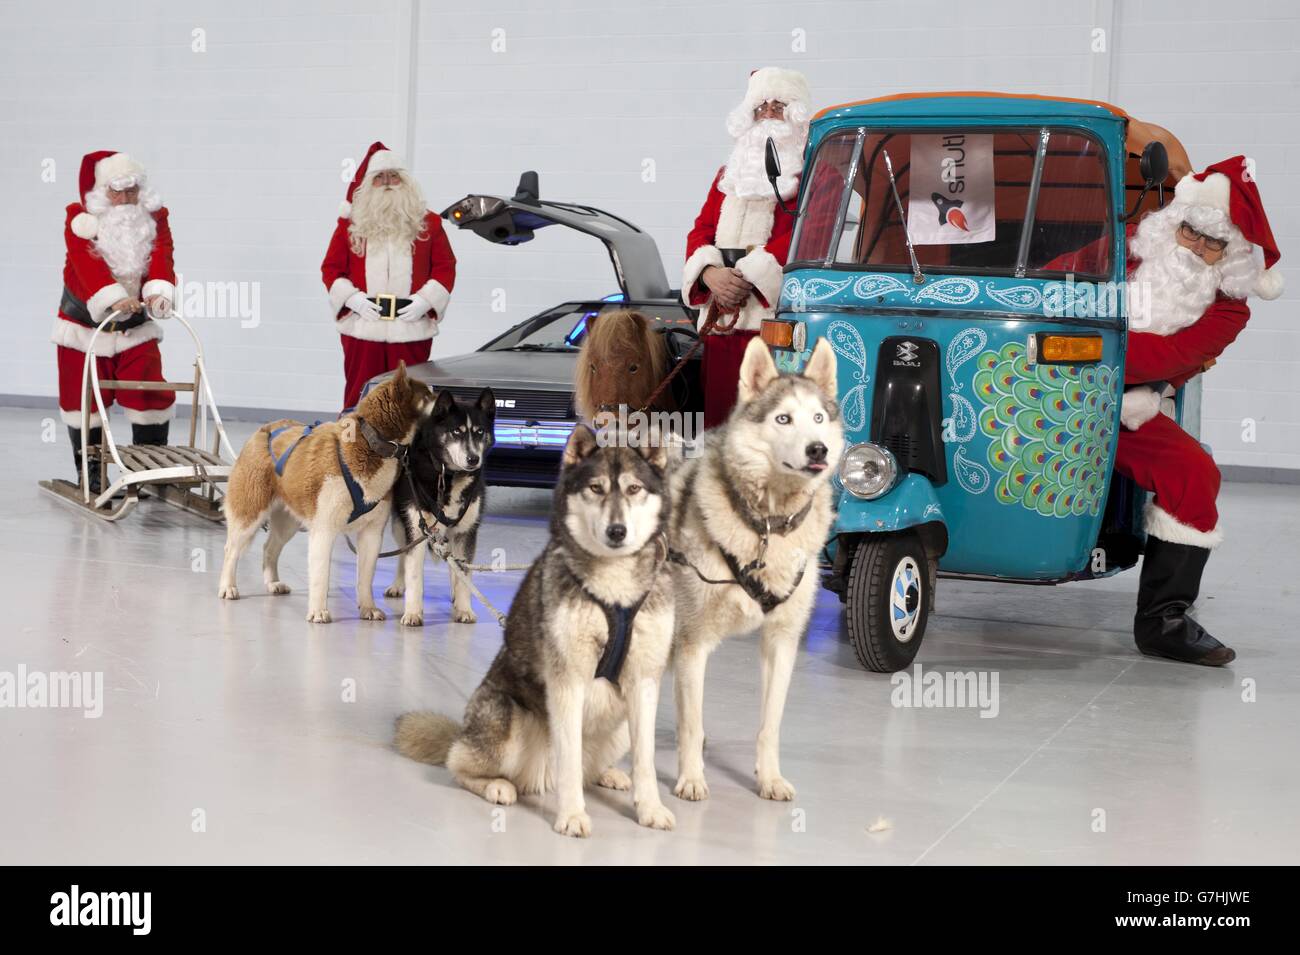 A Delorean, Shetland Pony, Tuk Tuk and Husky Sled part of a special Christmas fleet, prepares to make Shutl deliveries, at a depot in St Albans, Hertfordshire. Stock Photo